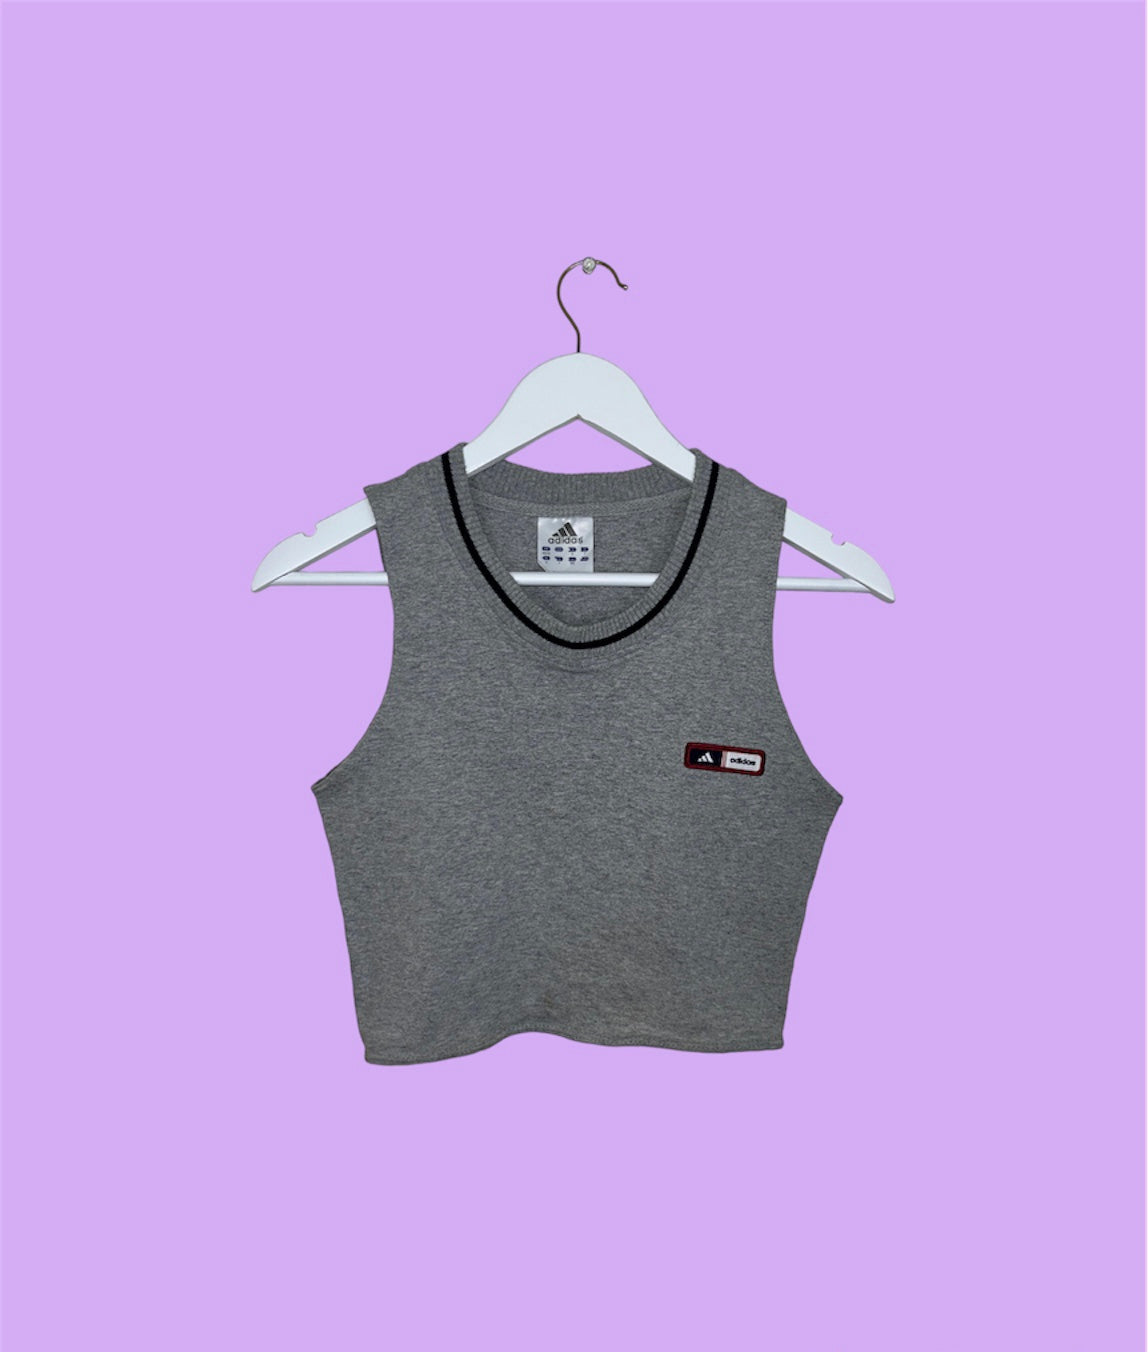 grey sleeveless crop top with small adidas logo shown on a lilac background